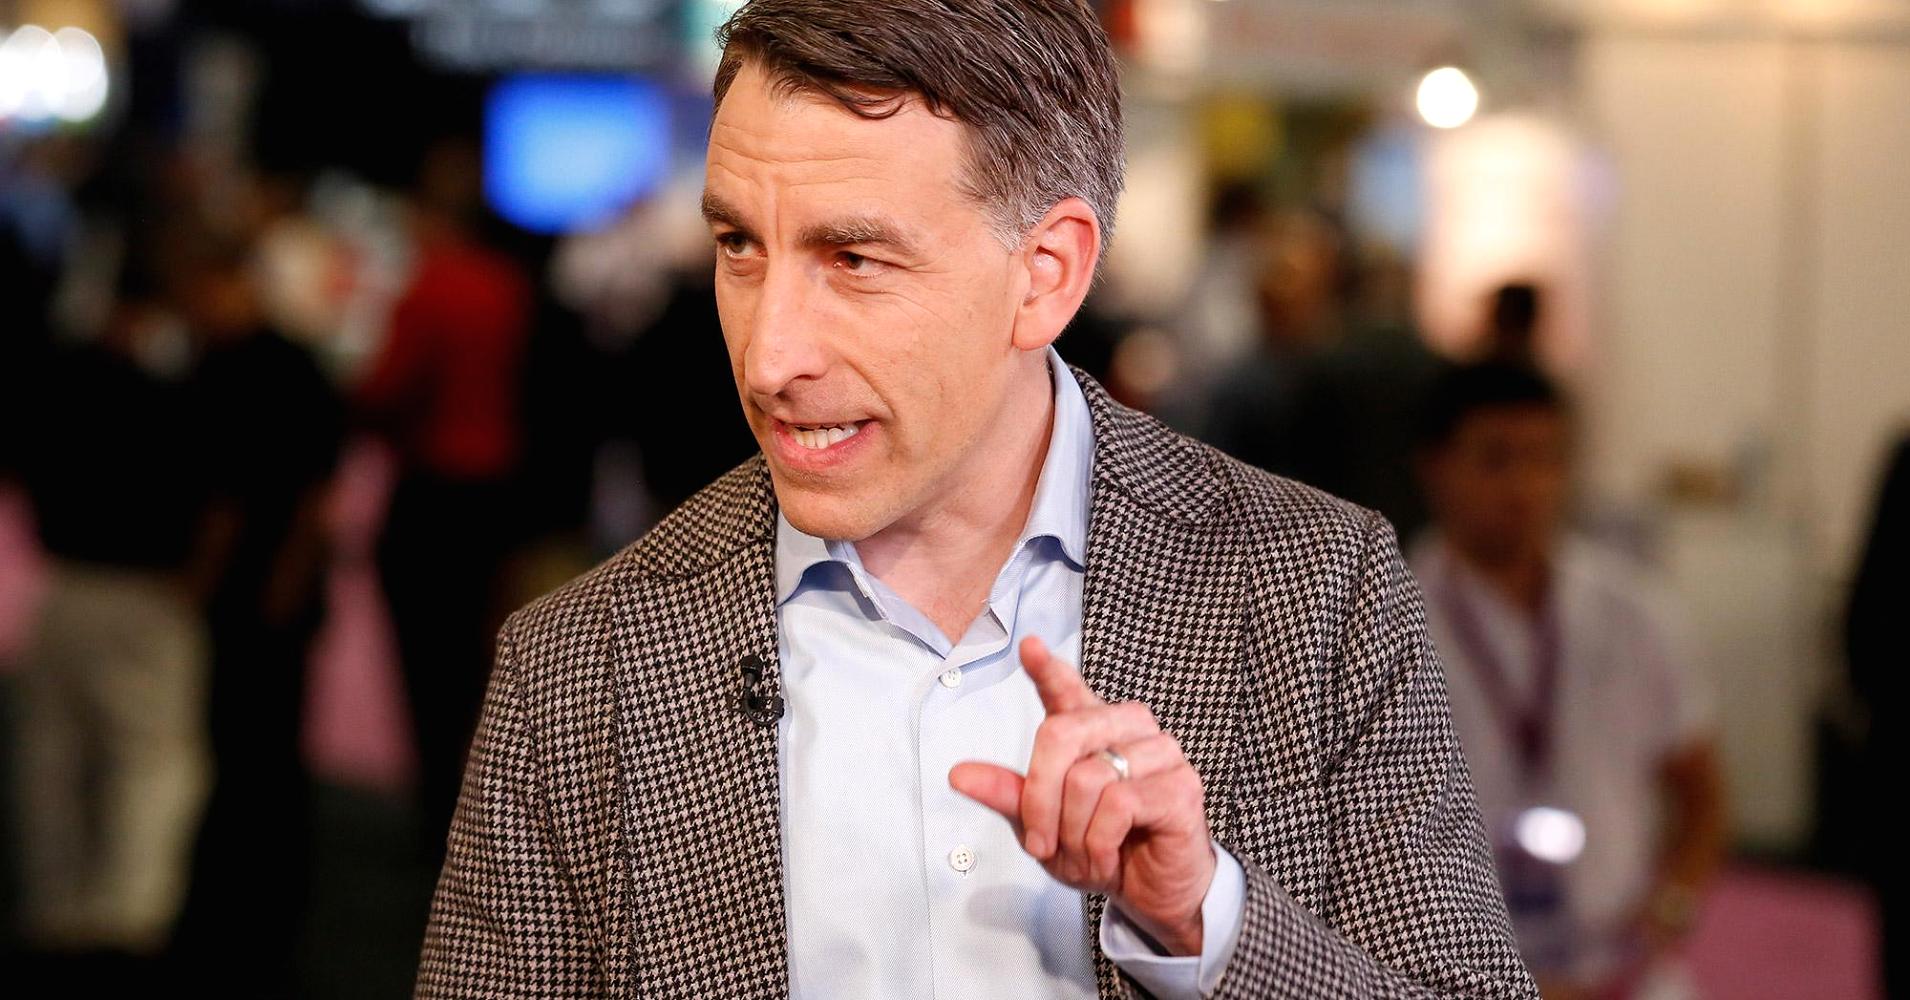 Silicon Valley will soon see a 'mass migration' of tech companies and talent, says Redfin CEO